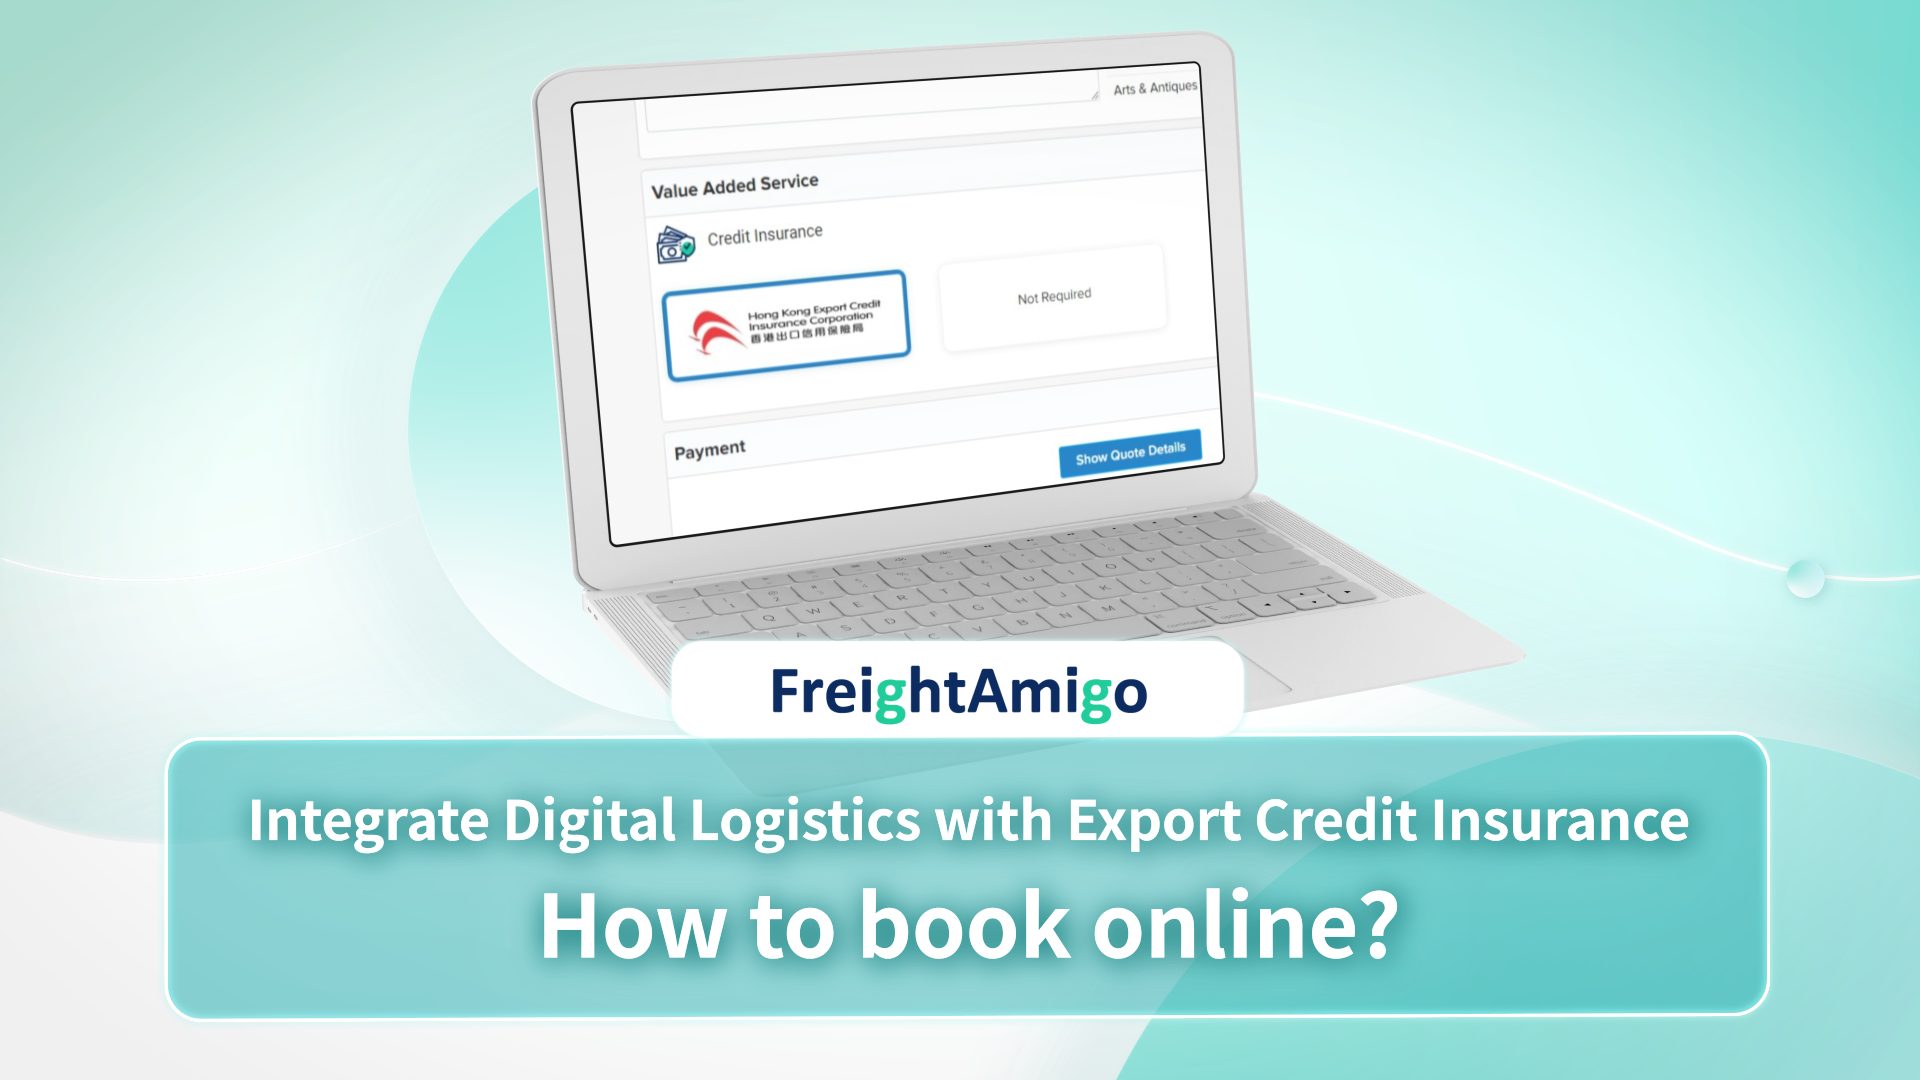 How to Purchase Export Credit Insurance Online to Reduce Bad Debt Losses｜FreightAmigo x HKECIC